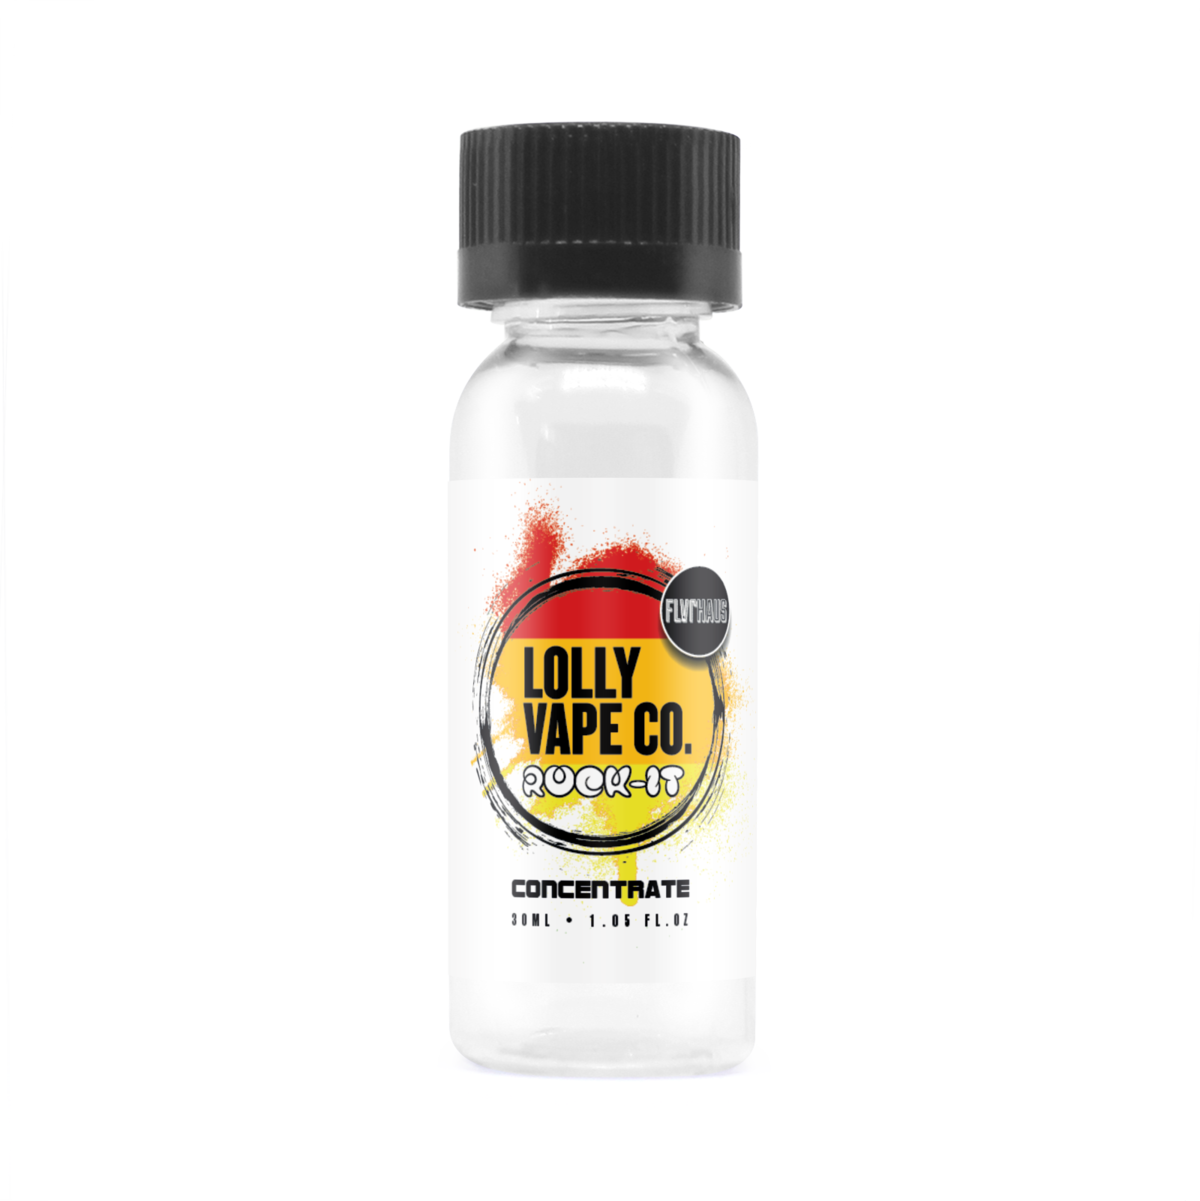 Rock It Concentrate E-Liquid by Lolly Vape Co 30ml